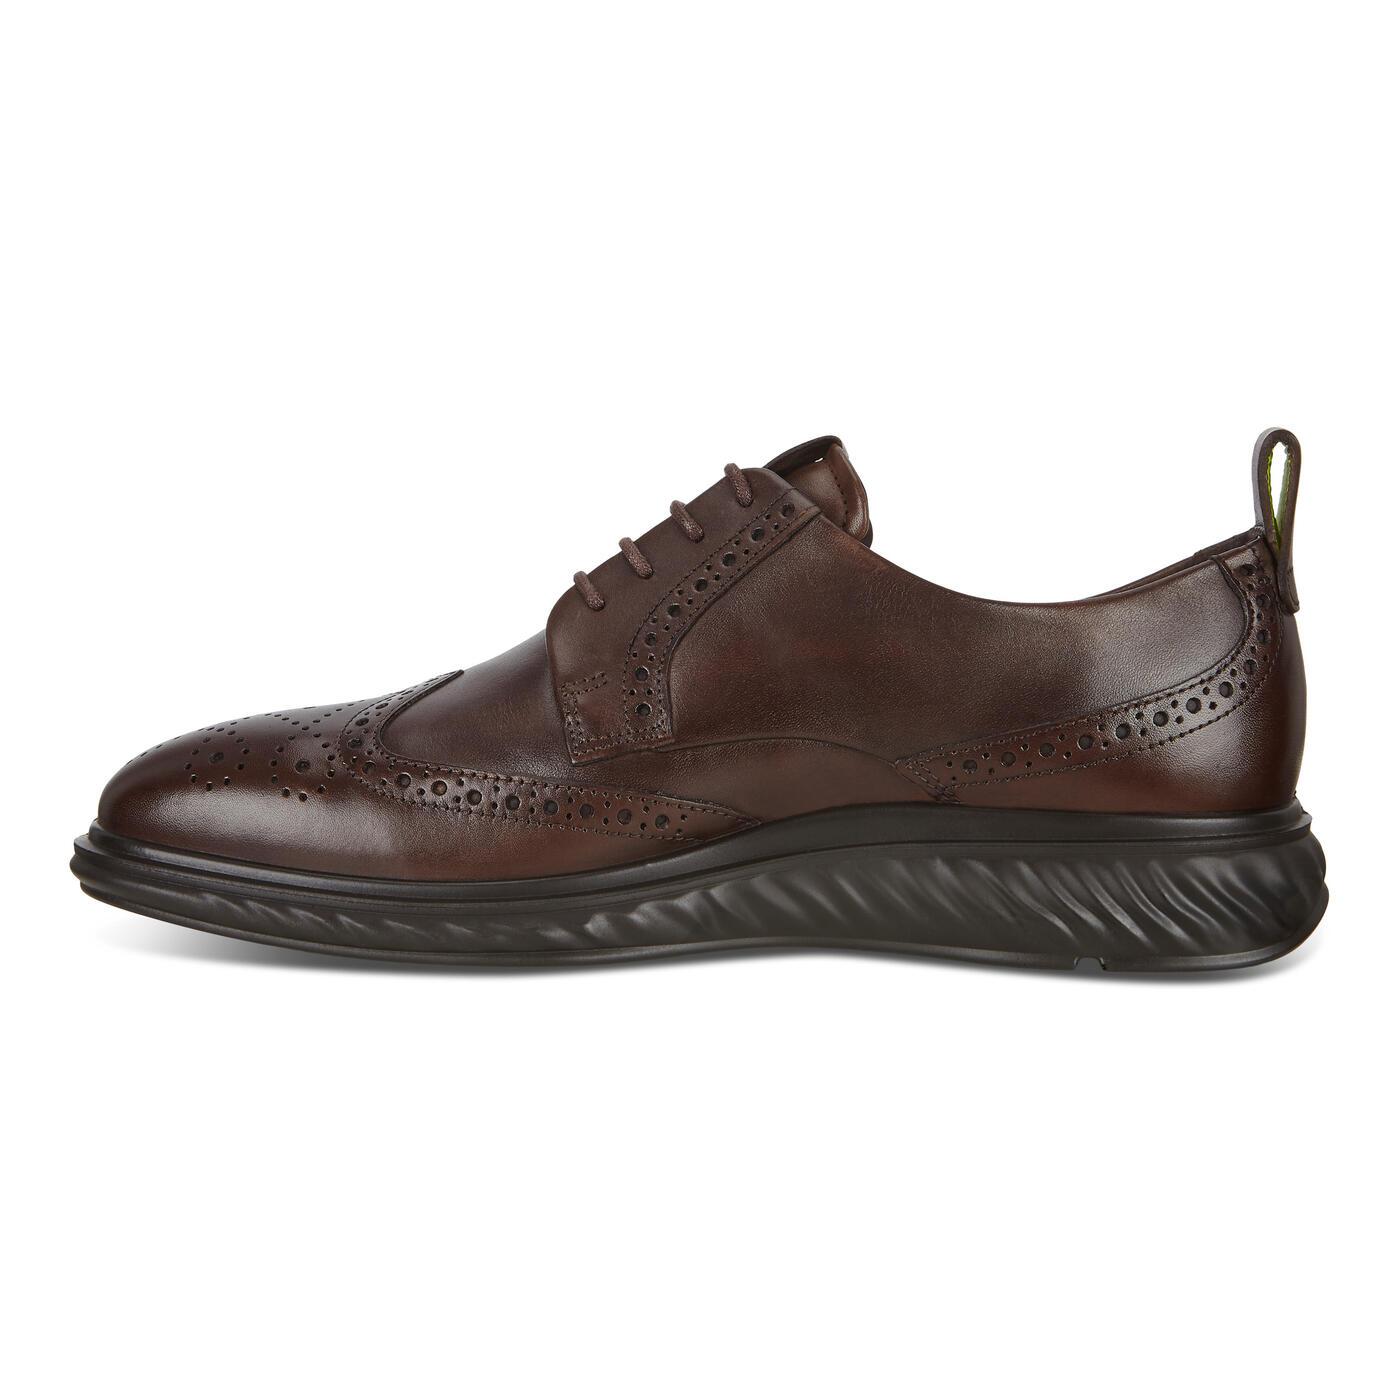 Ecco St.1 Hybrid Lite Wingtip Brogue Shoes in Cocoa Brown (Brown) for Men -  Lyst